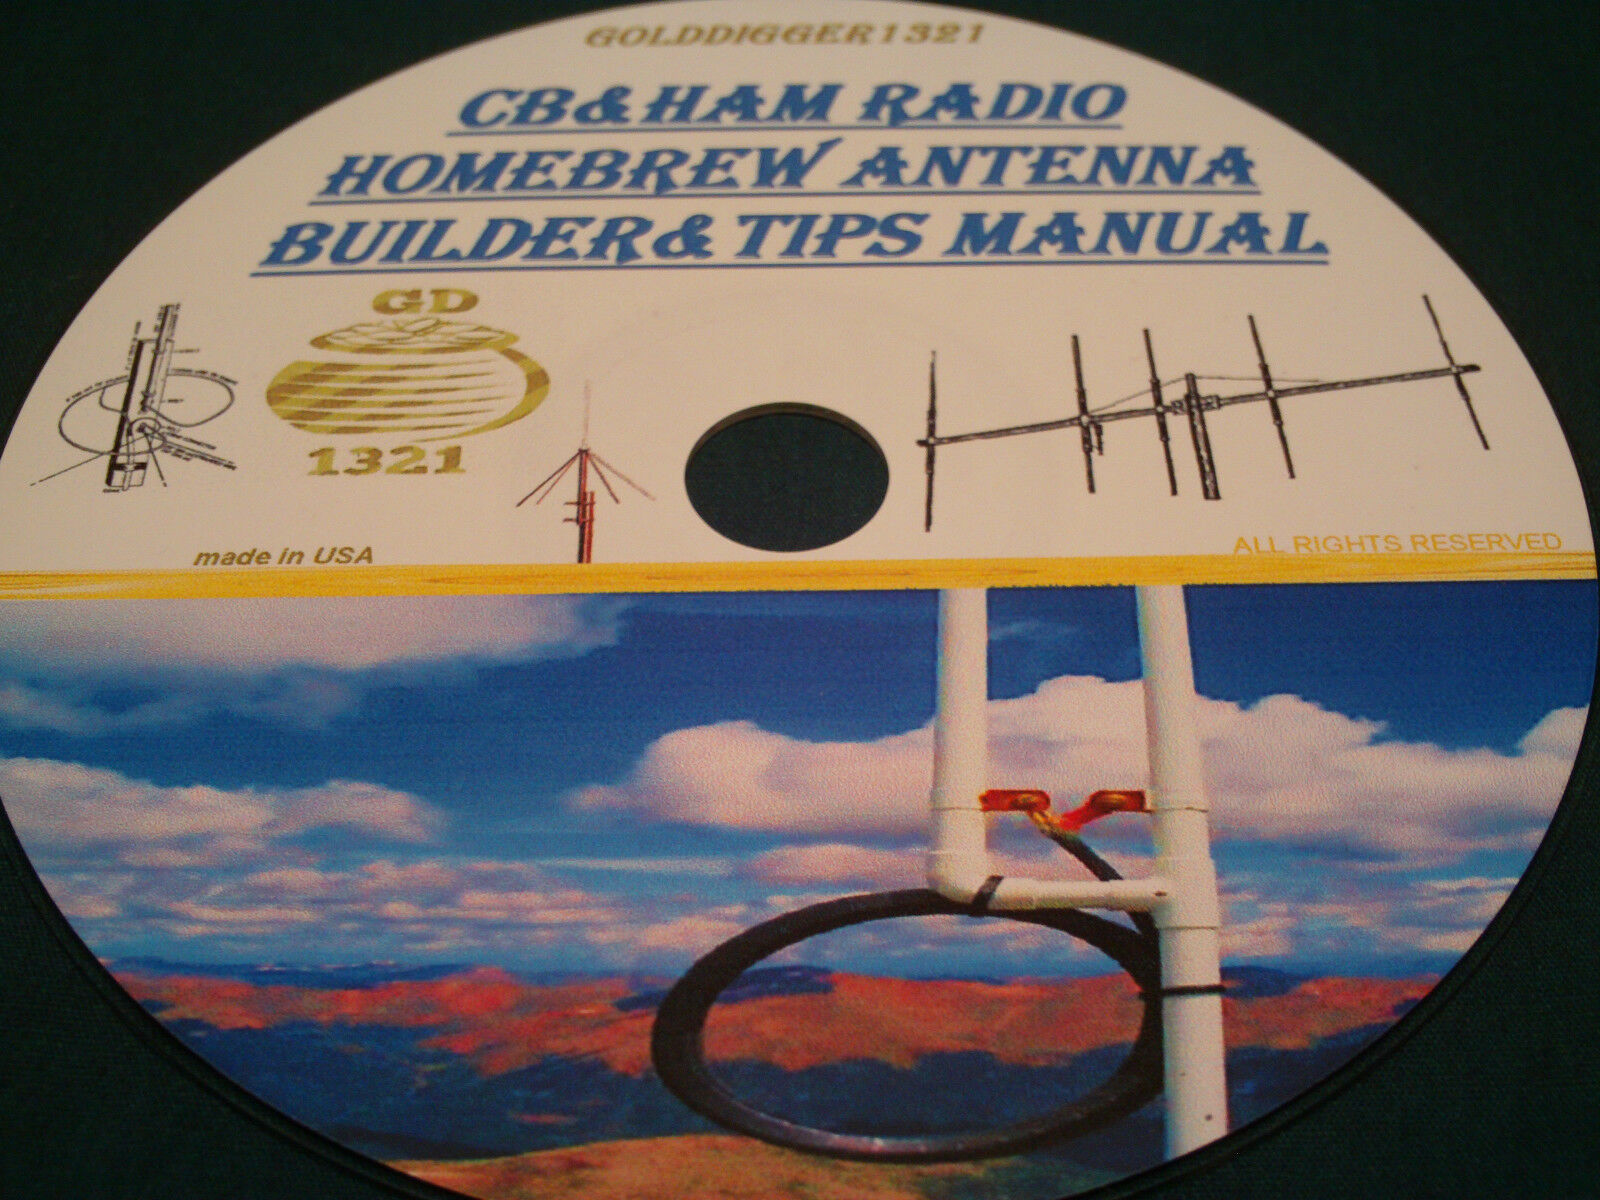 CB AND HAM RADIO HOMEBREW ANTENNA BUILDER AND TIPS MANUAL ON CD